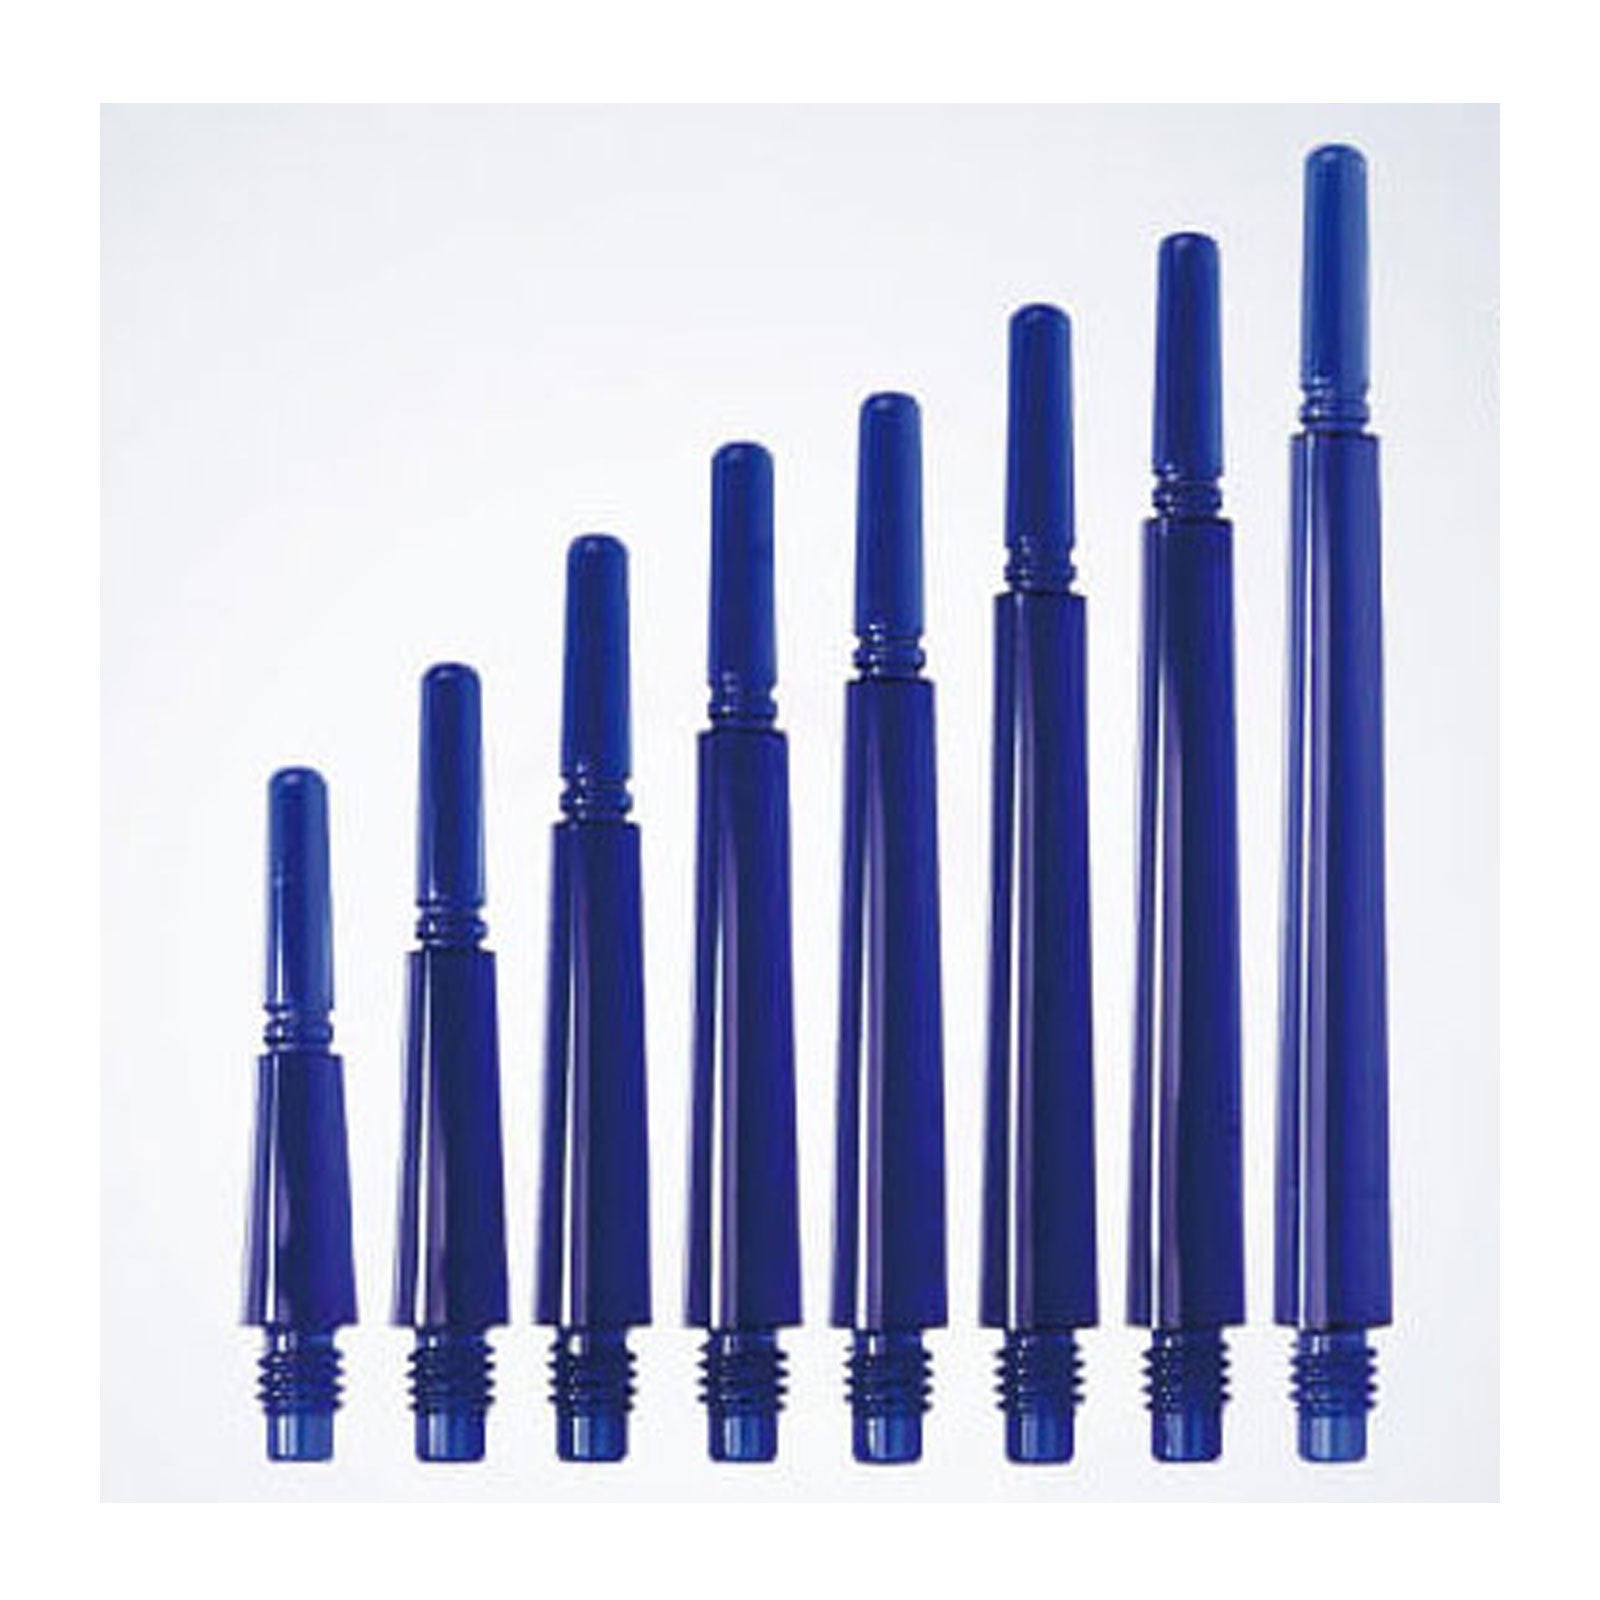 Cosmo Stems - Normal Spinning Dark Blue Shafts - Sizes 1 - 6